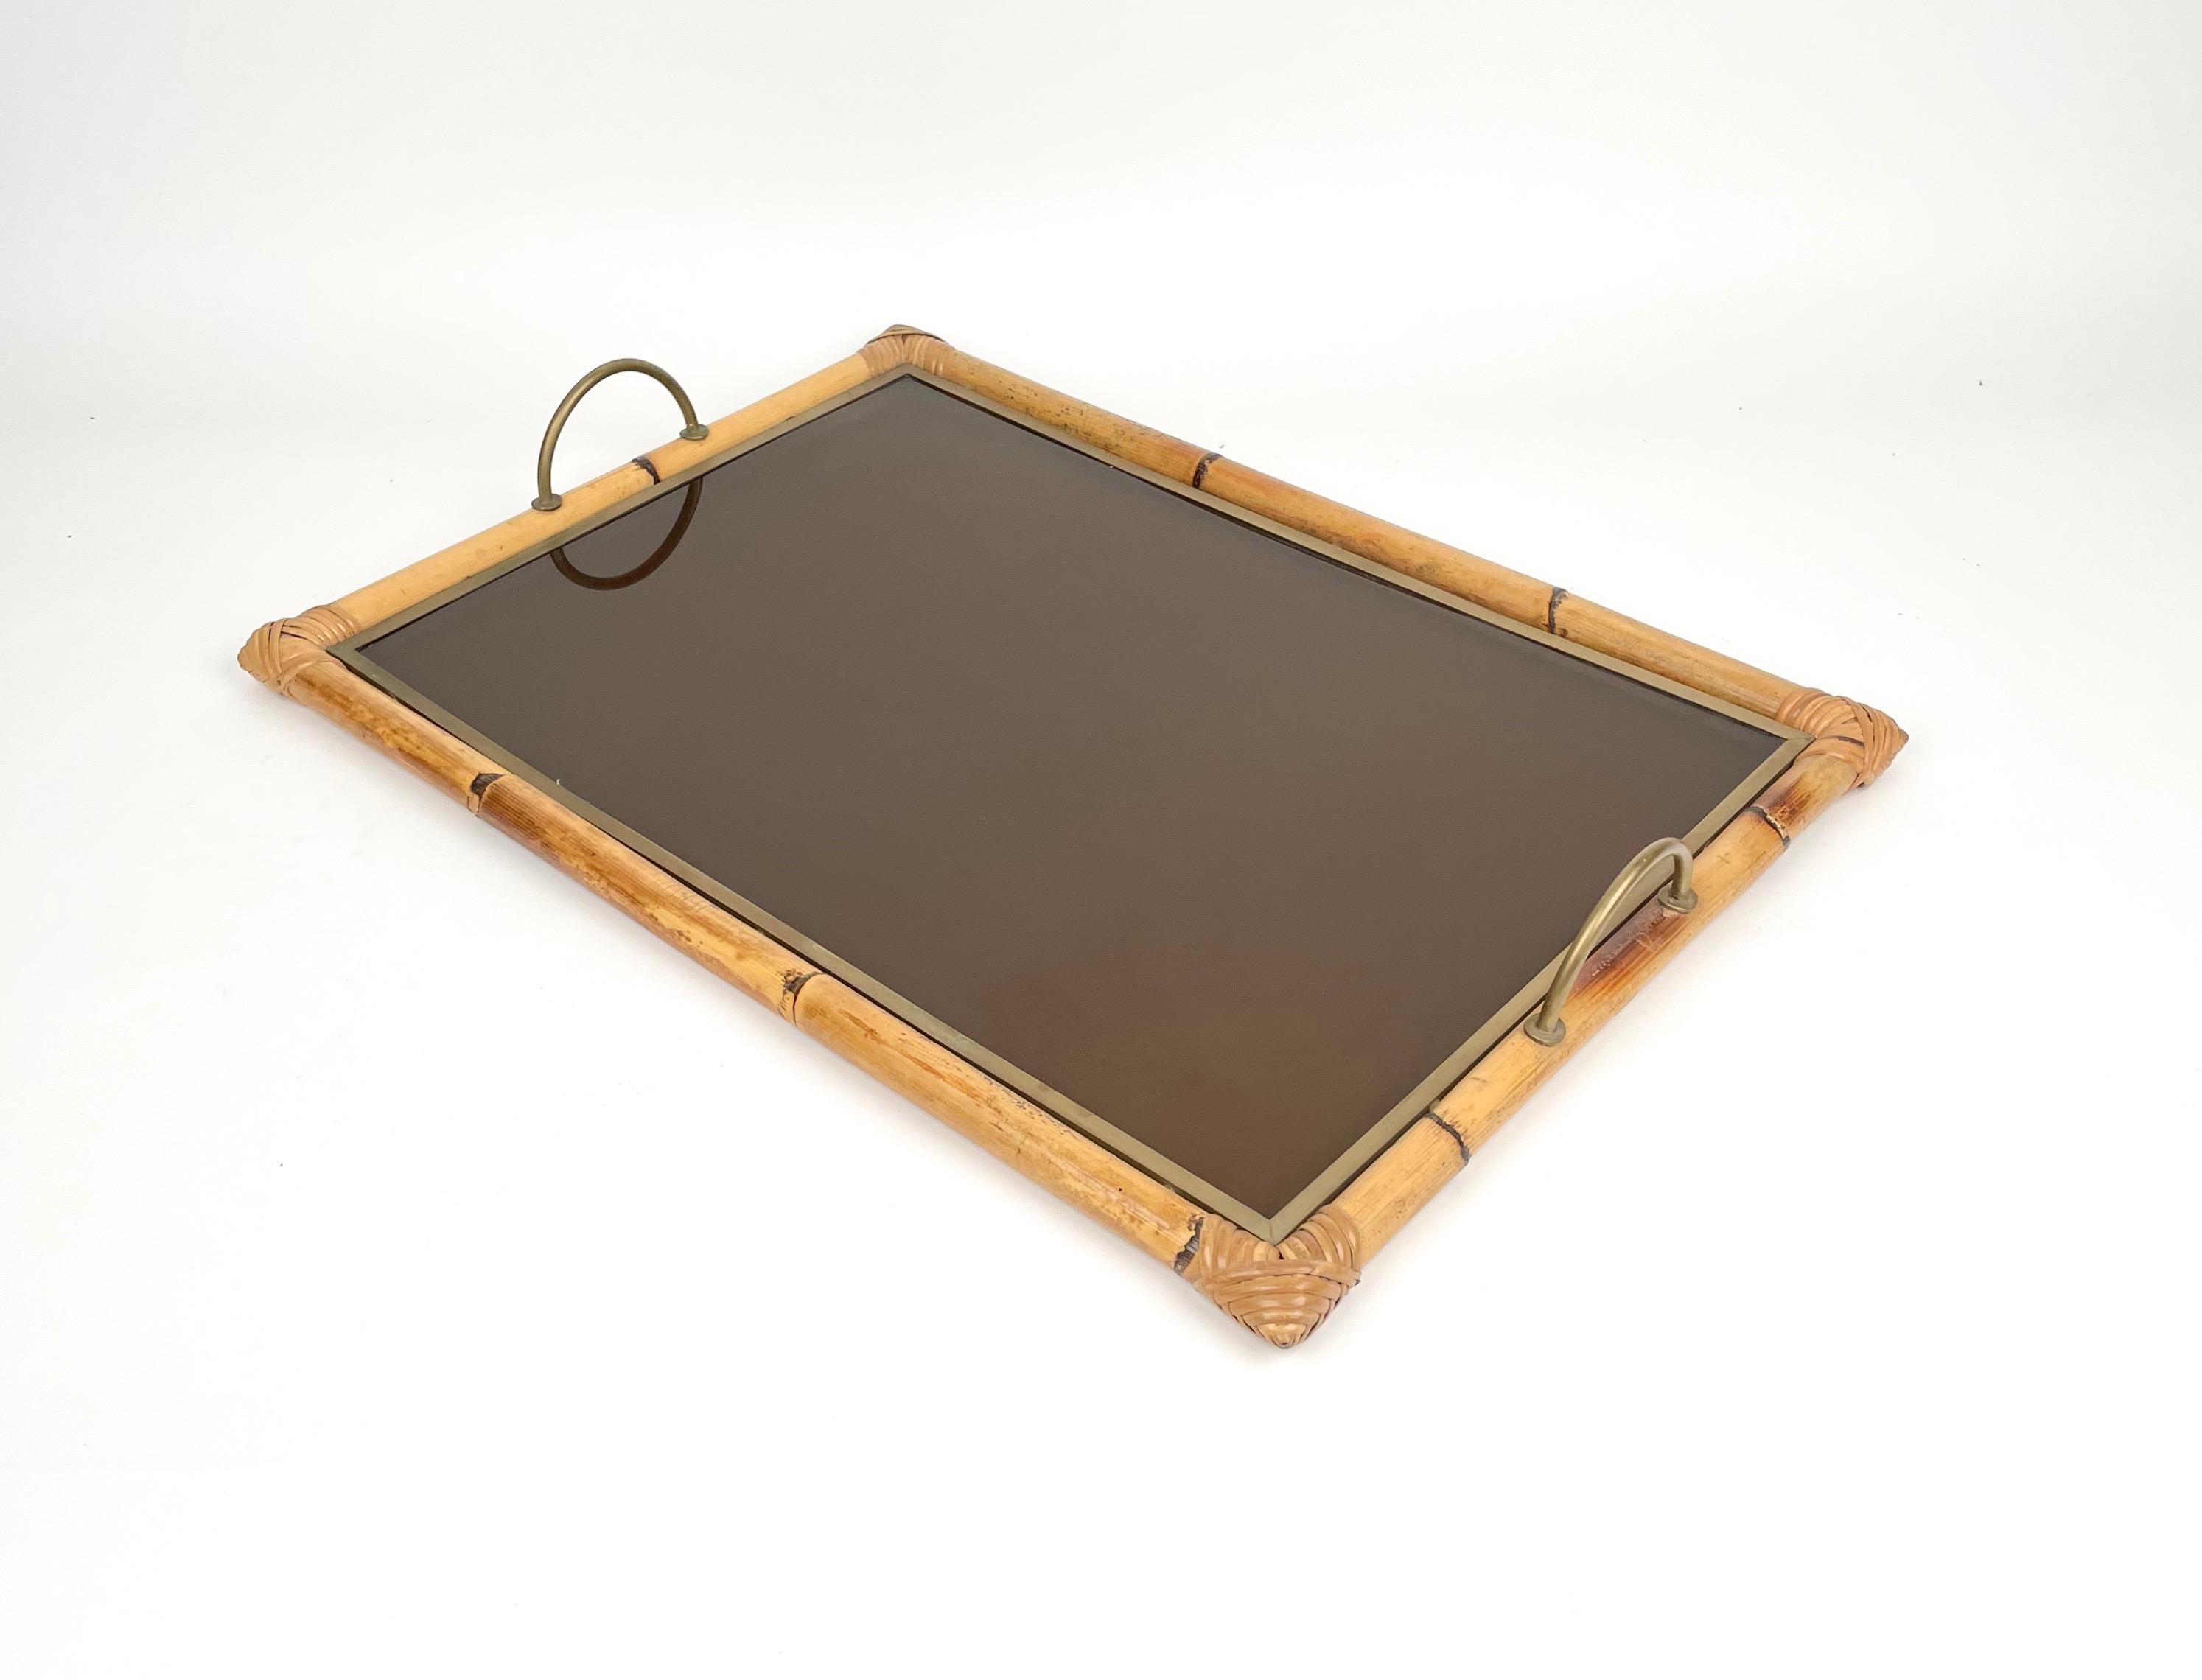 Serving tray in bamboo and Lucite with brass handles, made in Italy, 1970s.